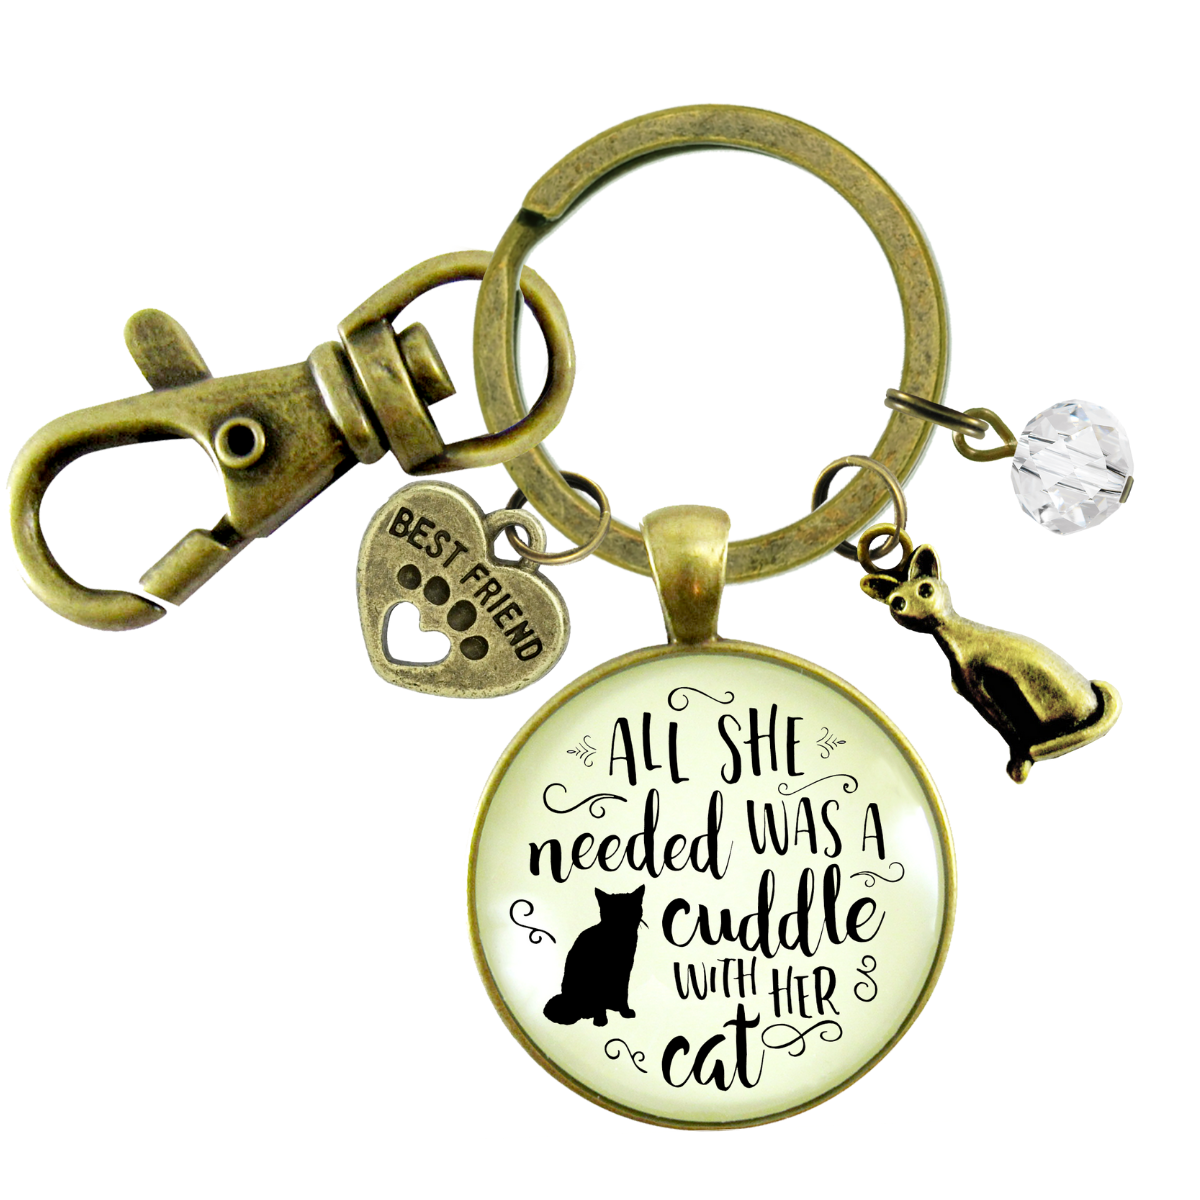 Cat Keychain All She Needed Was Cuddle Gift Quote Kitty Lover Related Cat Jewelry For Women - Gutsy Goodness Handmade Jewelry;Cat Keychain All She Needed Was Cuddle Gift Quote Kitty Lover Related Cat Jewelry For Women - Gutsy Goodness Handmade Jewelry Gifts